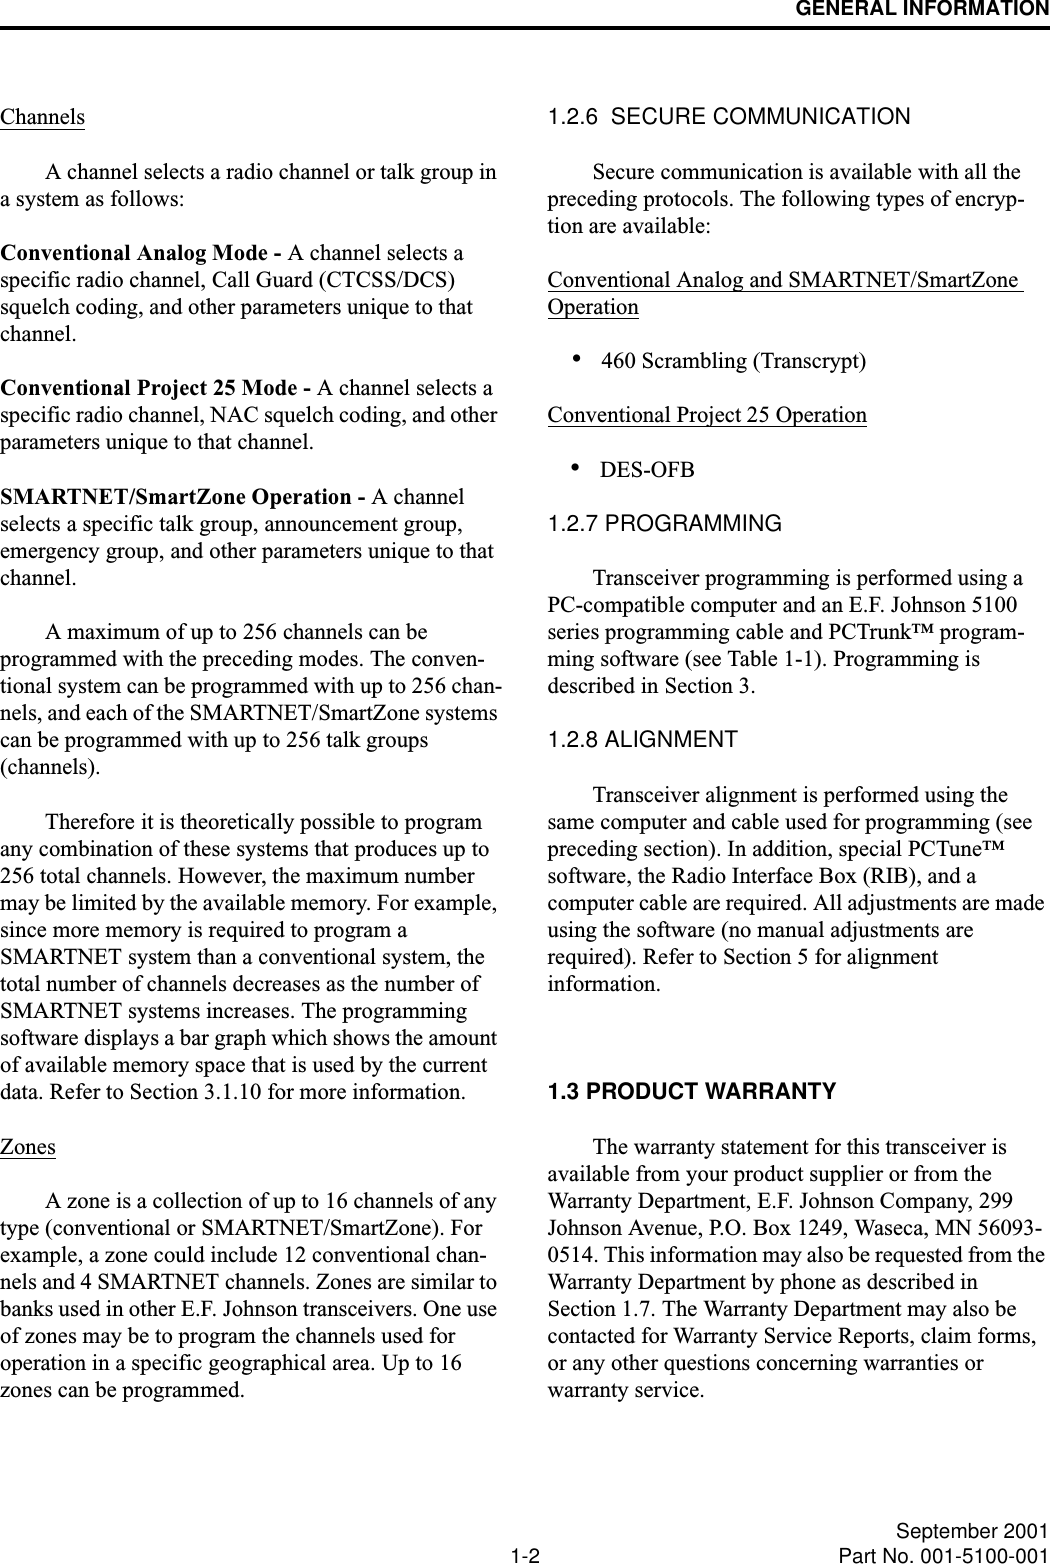 GENERAL INFORMATION1-2 September 2001Part No. 001-5100-001ChannelsA channel selects a radio channel or talk group in a system as follows:Conventional Analog Mode - A channel selects a specific radio channel, Call Guard (CTCSS/DCS) squelch coding, and other parameters unique to that channel.Conventional Project 25 Mode - A channel selects a specific radio channel, NAC squelch coding, and other parameters unique to that channel. SMARTNET/SmartZone Operation - A channel selects a specific talk group, announcement group, emergency group, and other parameters unique to that channel.A maximum of up to 256 channels can be programmed with the preceding modes. The conven-tional system can be programmed with up to 256 chan-nels, and each of the SMARTNET/SmartZone systems can be programmed with up to 256 talk groups (channels). Therefore it is theoretically possible to program any combination of these systems that produces up to 256 total channels. However, the maximum number may be limited by the available memory. For example, since more memory is required to program a SMARTNET system than a conventional system, the total number of channels decreases as the number of SMARTNET systems increases. The programming software displays a bar graph which shows the amount of available memory space that is used by the current data. Refer to Section 3.1.10 for more information. ZonesA zone is a collection of up to 16 channels of any type (conventional or SMARTNET/SmartZone). For example, a zone could include 12 conventional chan-nels and 4 SMARTNET channels. Zones are similar to banks used in other E.F. Johnson transceivers. One use of zones may be to program the channels used for operation in a specific geographical area. Up to 16 zones can be programmed.1.2.6  SECURE COMMUNICATIONSecure communication is available with all the preceding protocols. The following types of encryp-tion are available:Conventional Analog and SMARTNET/SmartZone Operation•460 Scrambling (Transcrypt)Conventional Project 25 Operation•DES-OFB1.2.7 PROGRAMMINGTransceiver programming is performed using a PC-compatible computer and an E.F. Johnson 5100 series programming cable and PCTrunk™ program-ming software (see Table 1-1). Programming is described in Section 3.1.2.8 ALIGNMENTTransceiver alignment is performed using the same computer and cable used for programming (see preceding section). In addition, special PCTune™ software, the Radio Interface Box (RIB), and a computer cable are required. All adjustments are made using the software (no manual adjustments are required). Refer to Section 5 for alignment information.1.3 PRODUCT WARRANTYThe warranty statement for this transceiver is available from your product supplier or from the Warranty Department, E.F. Johnson Company, 299 Johnson Avenue, P.O. Box 1249, Waseca, MN 56093-0514. This information may also be requested from the Warranty Department by phone as described in Section 1.7. The Warranty Department may also be contacted for Warranty Service Reports, claim forms, or any other questions concerning warranties or warranty service.